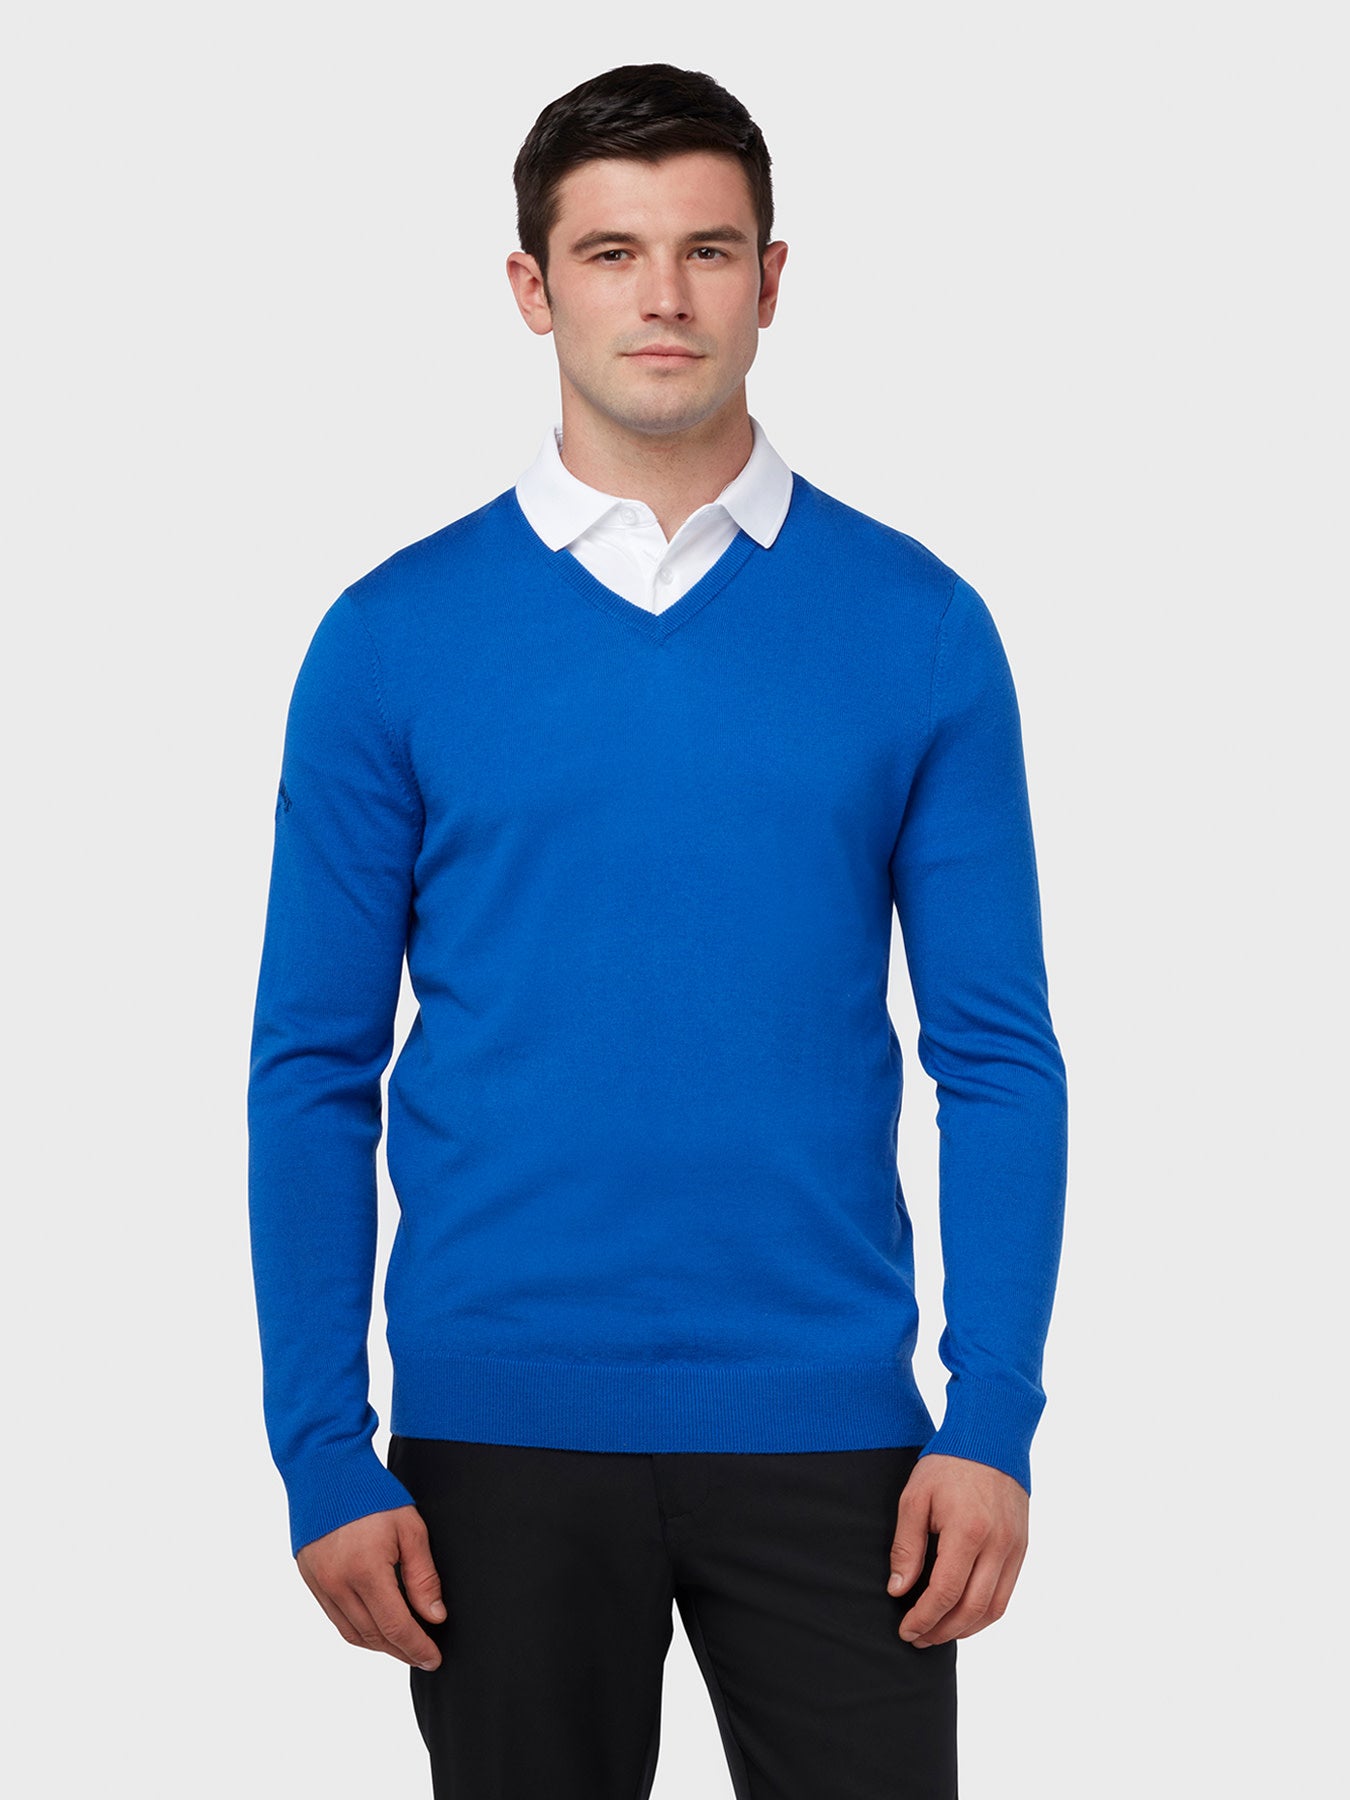 View Thermal Merino Wool VNeck Sweater In Surfing Blue information